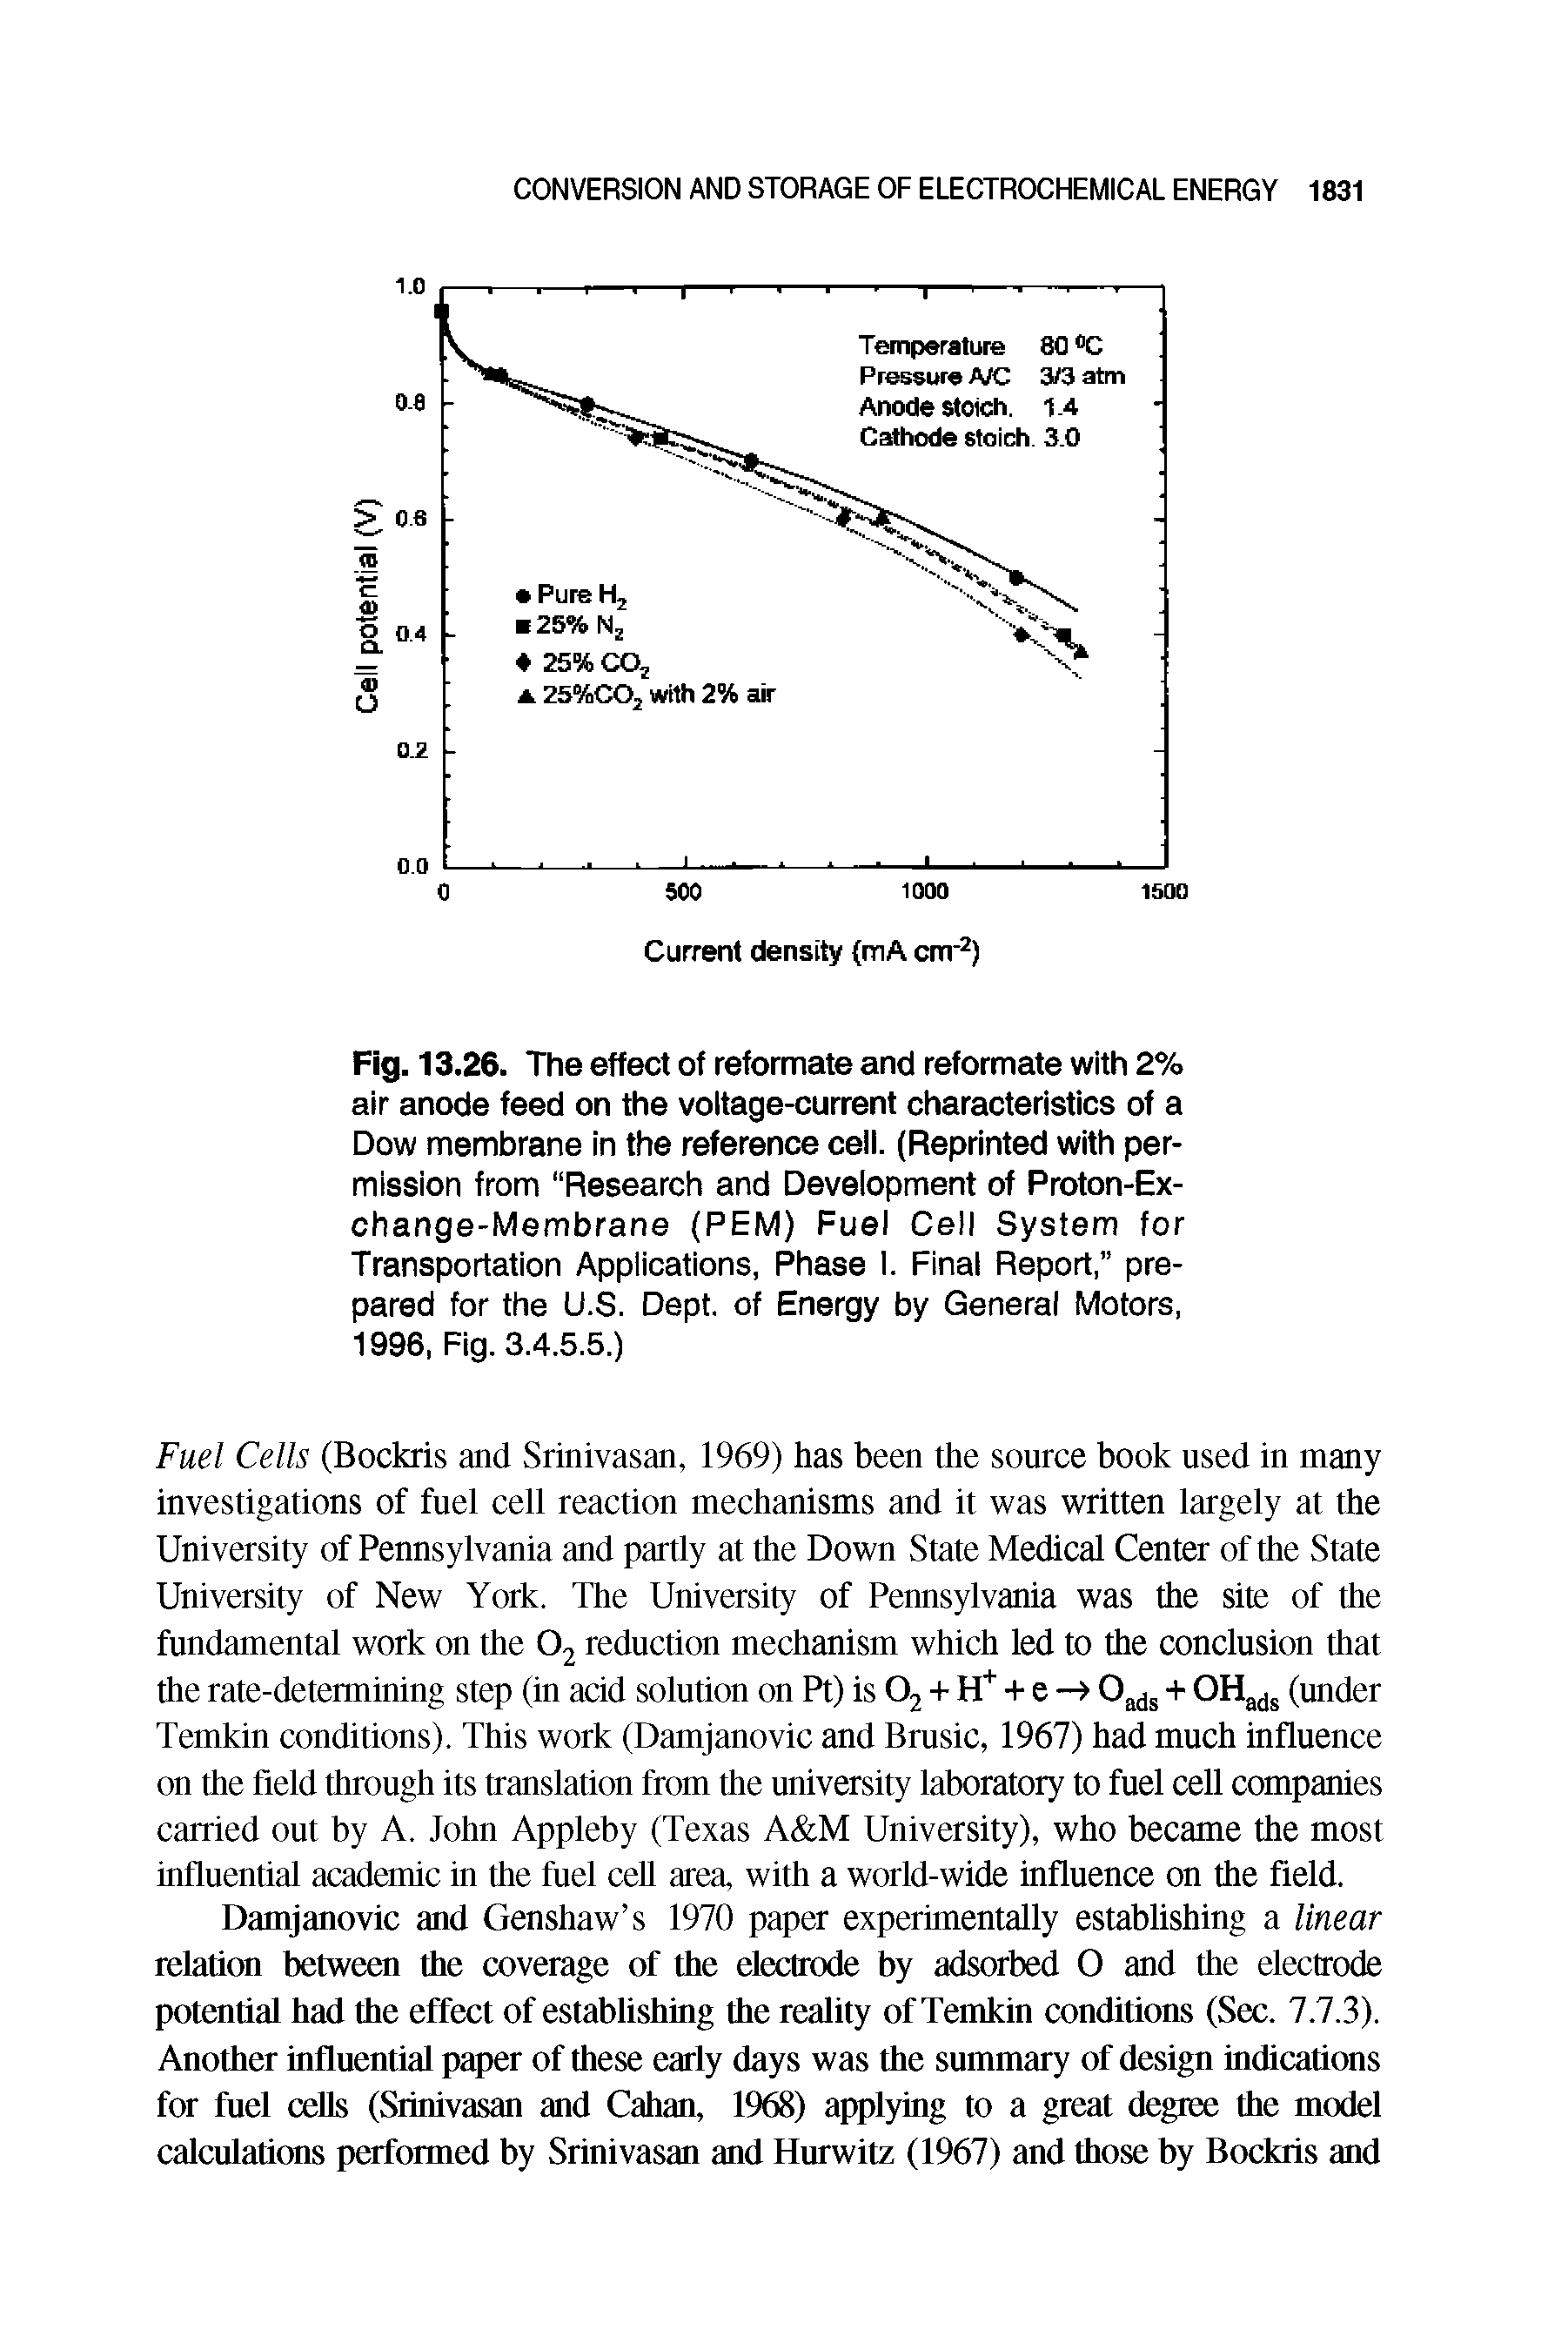 Fig. 13.26. The effect of reformate and reformate with 2% air anode feed on the voltage-current characteristics of a Dow membrane in the reference cell. (Reprinted with permission from Research and Development of Proton-Exchange-Membrane (PEM) Fuel Cell System for Transportation Applications, Phase I. Final Report, prepared for the U.S. Dept, of Energy by General Motors, 1996, Fig. 3.4.5.5.)...